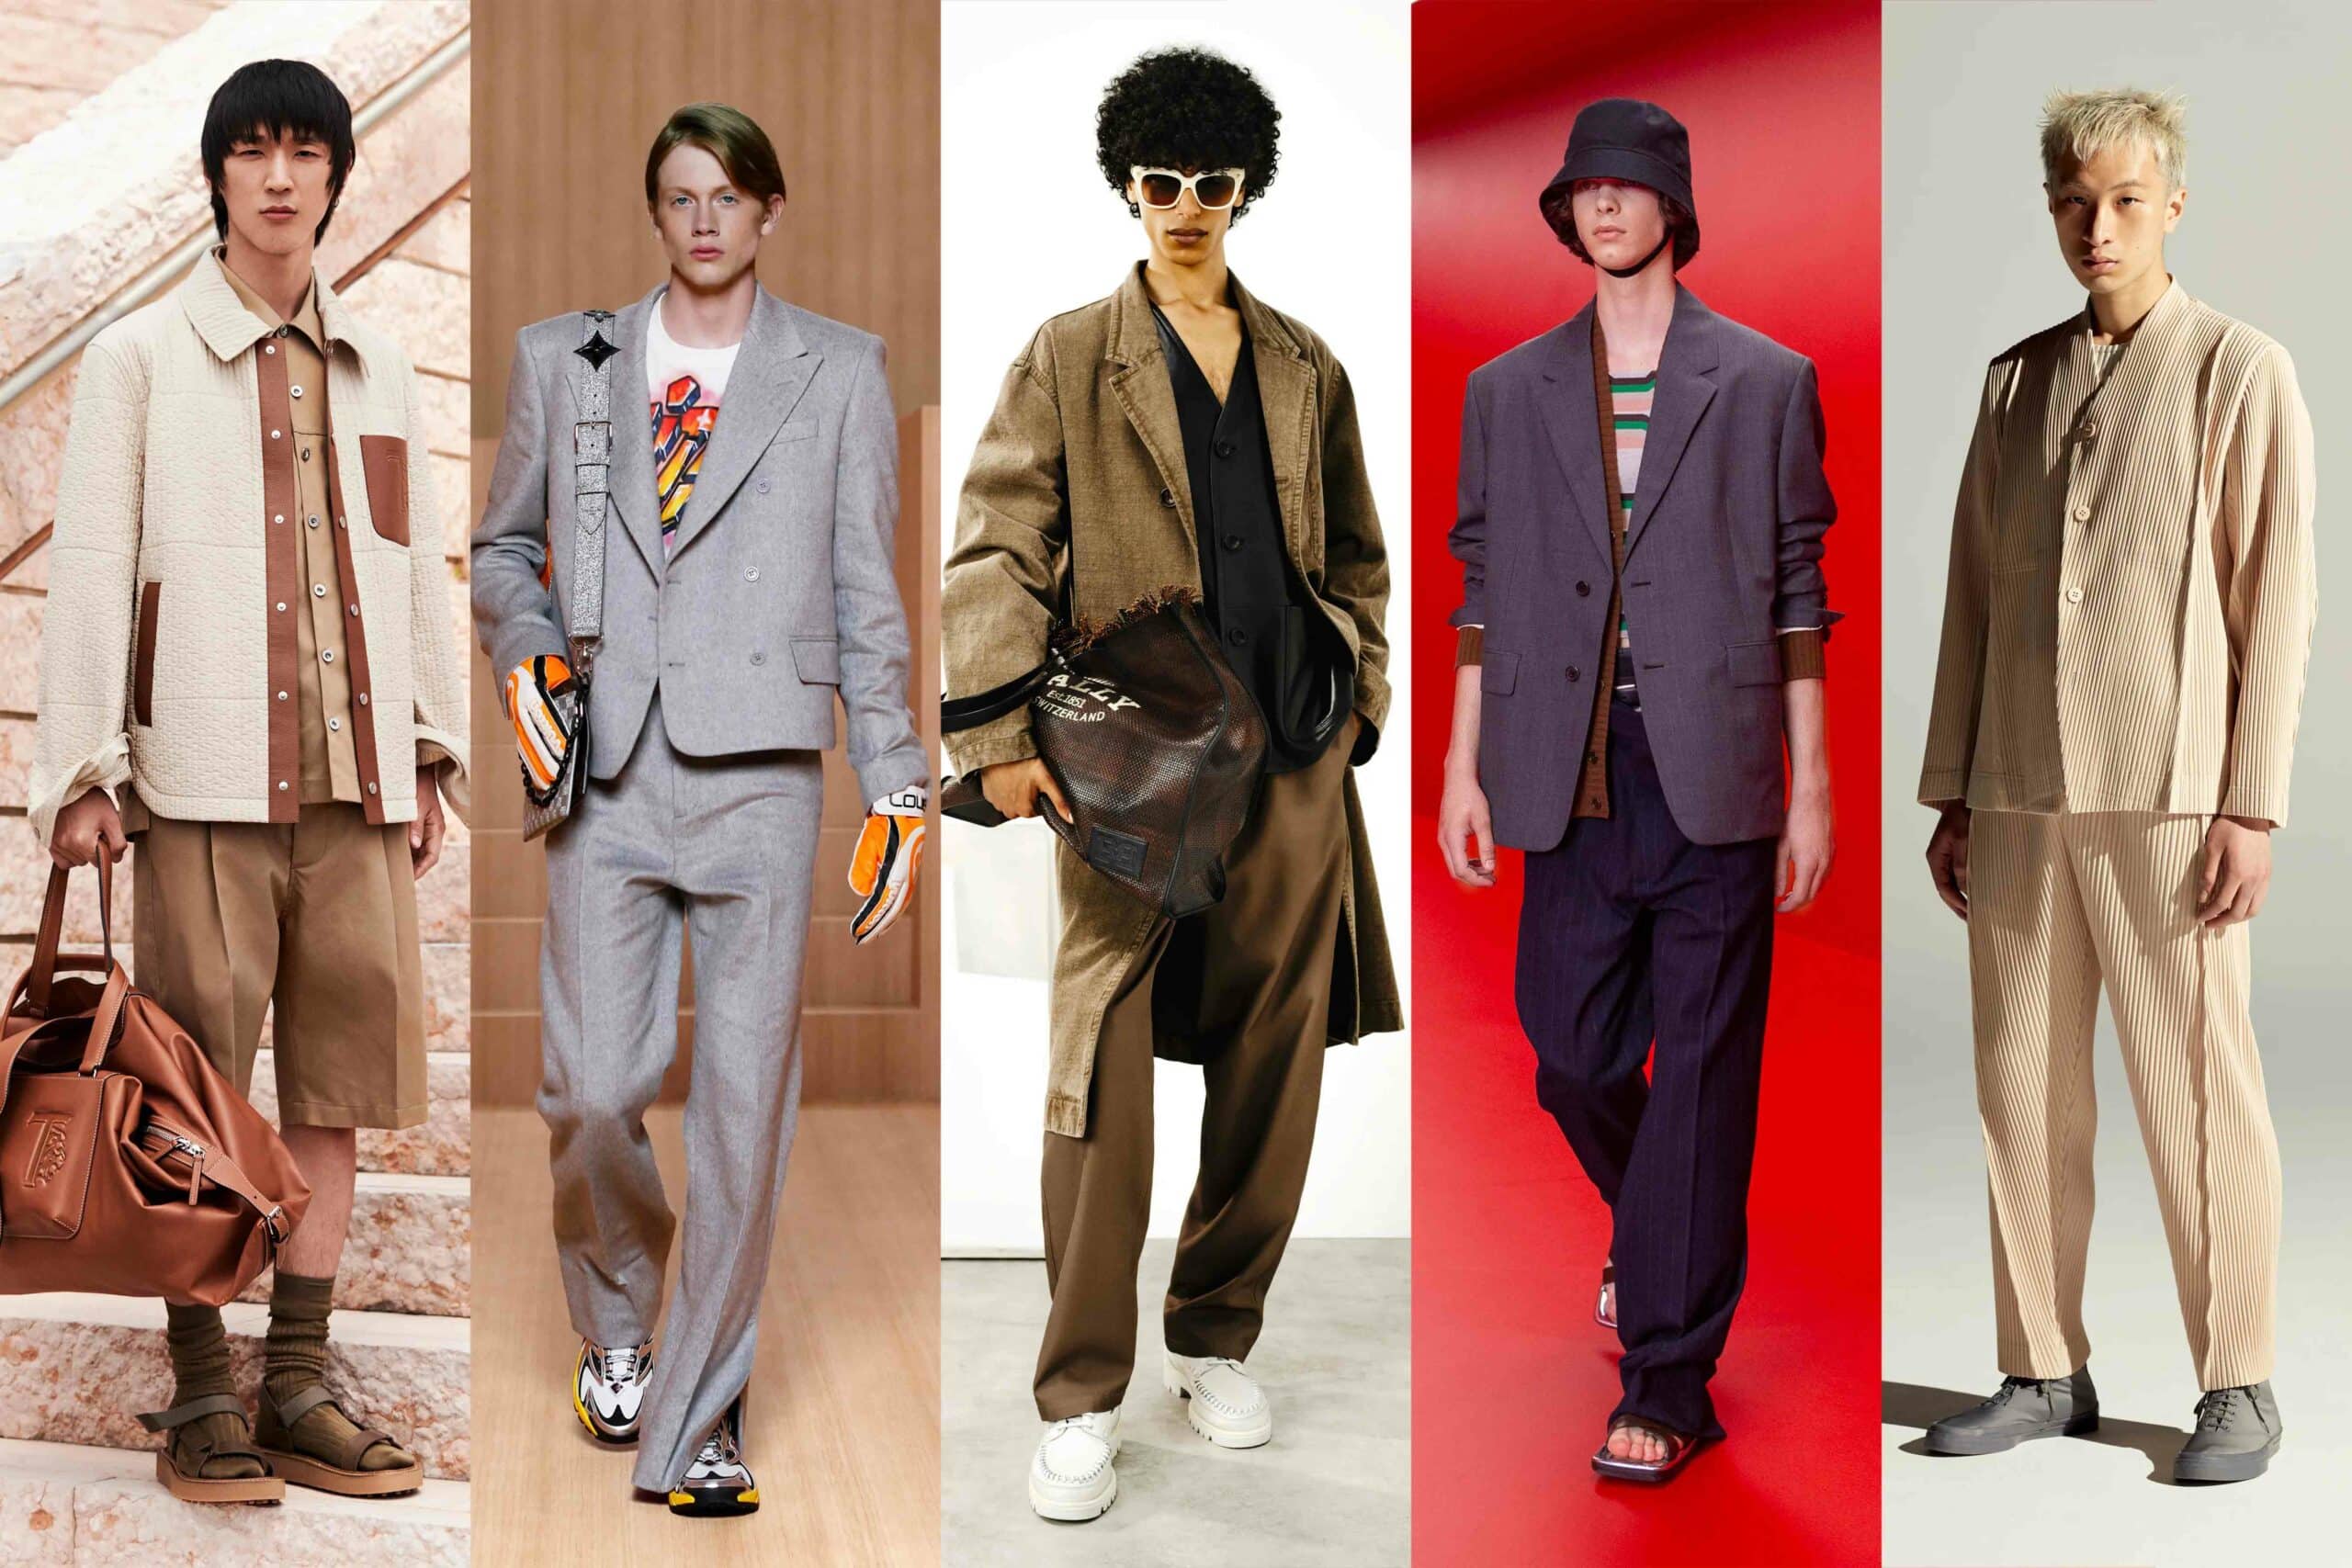 The trouser trends 2022